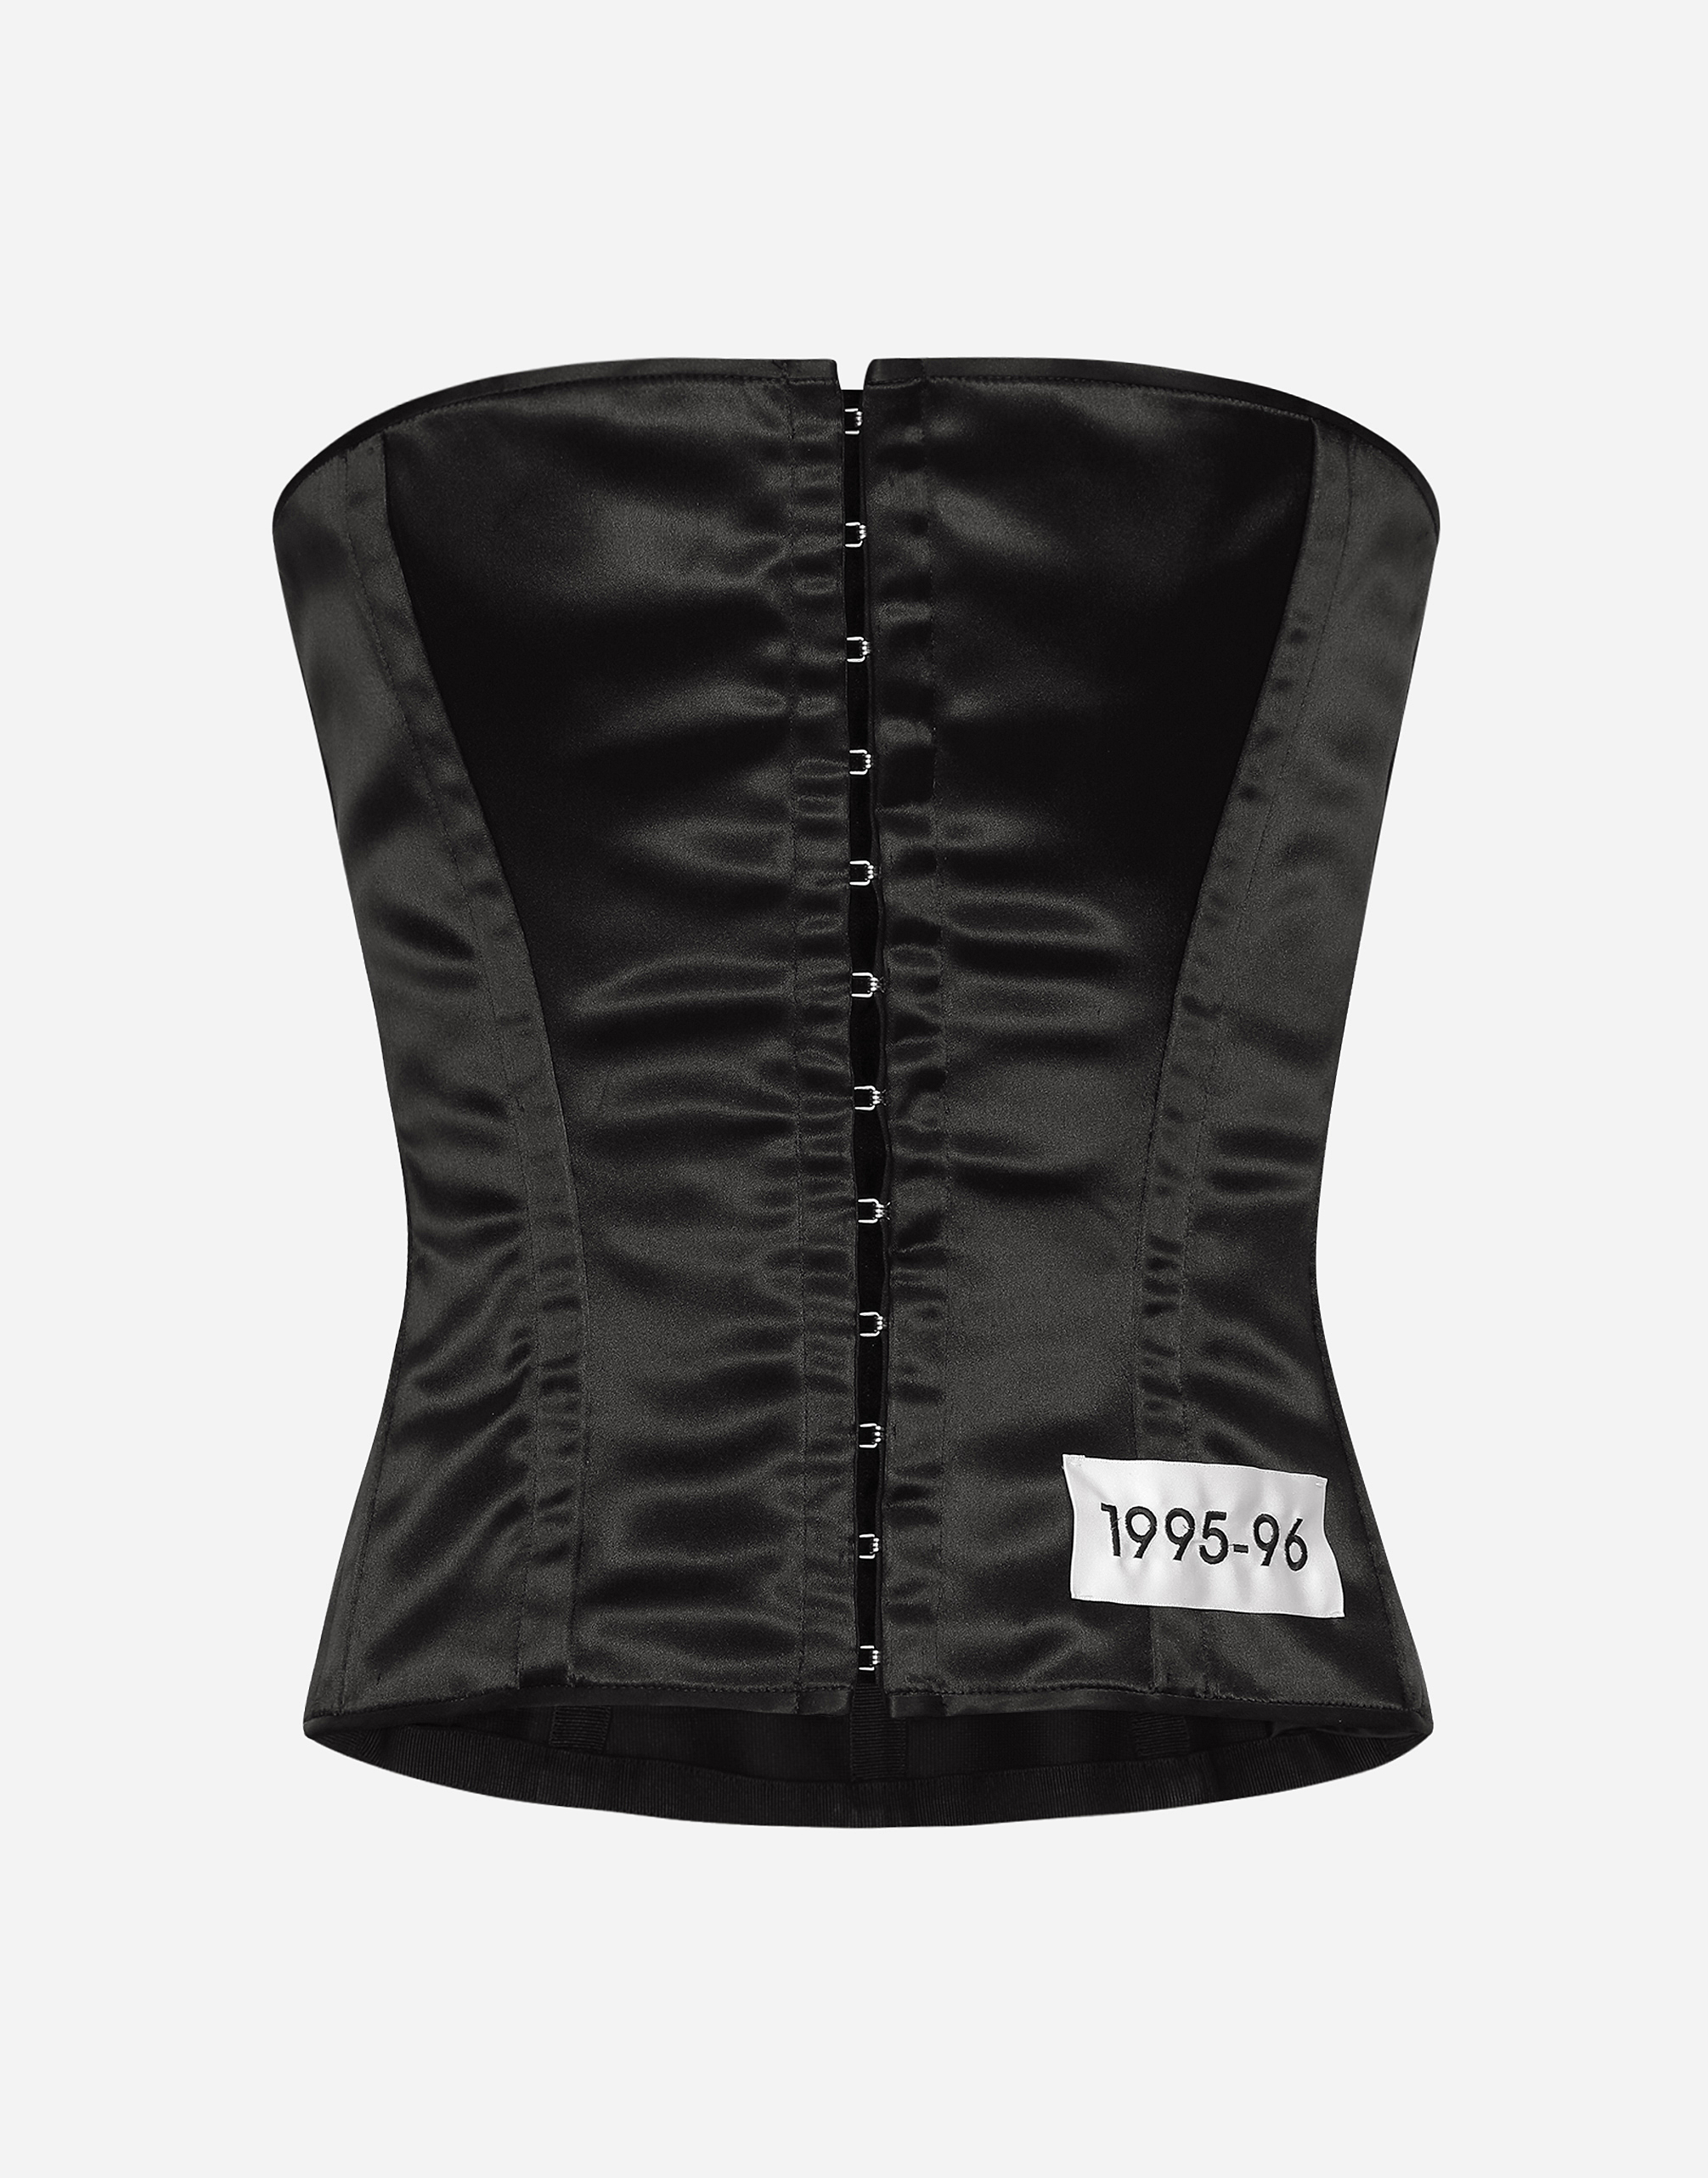 Dolce & Gabbana Corset With Re-edition Label In Black